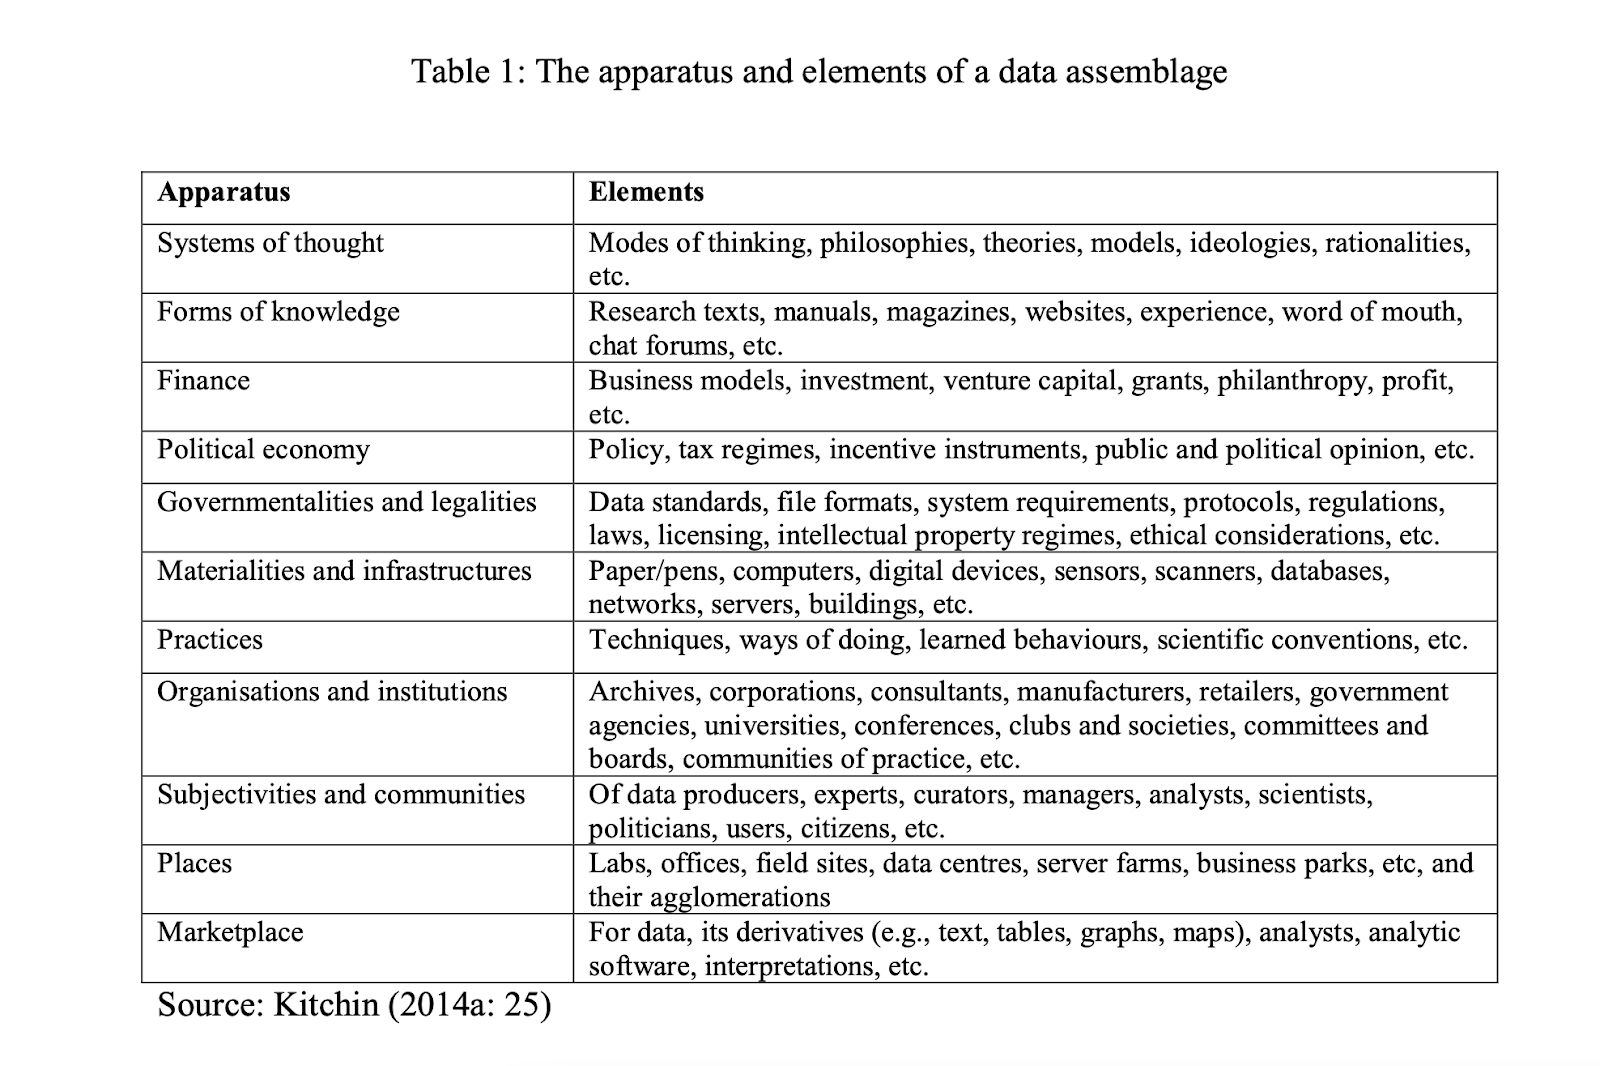 Figure 1: “Table 1” from Kitchin and Lauriault (2014).